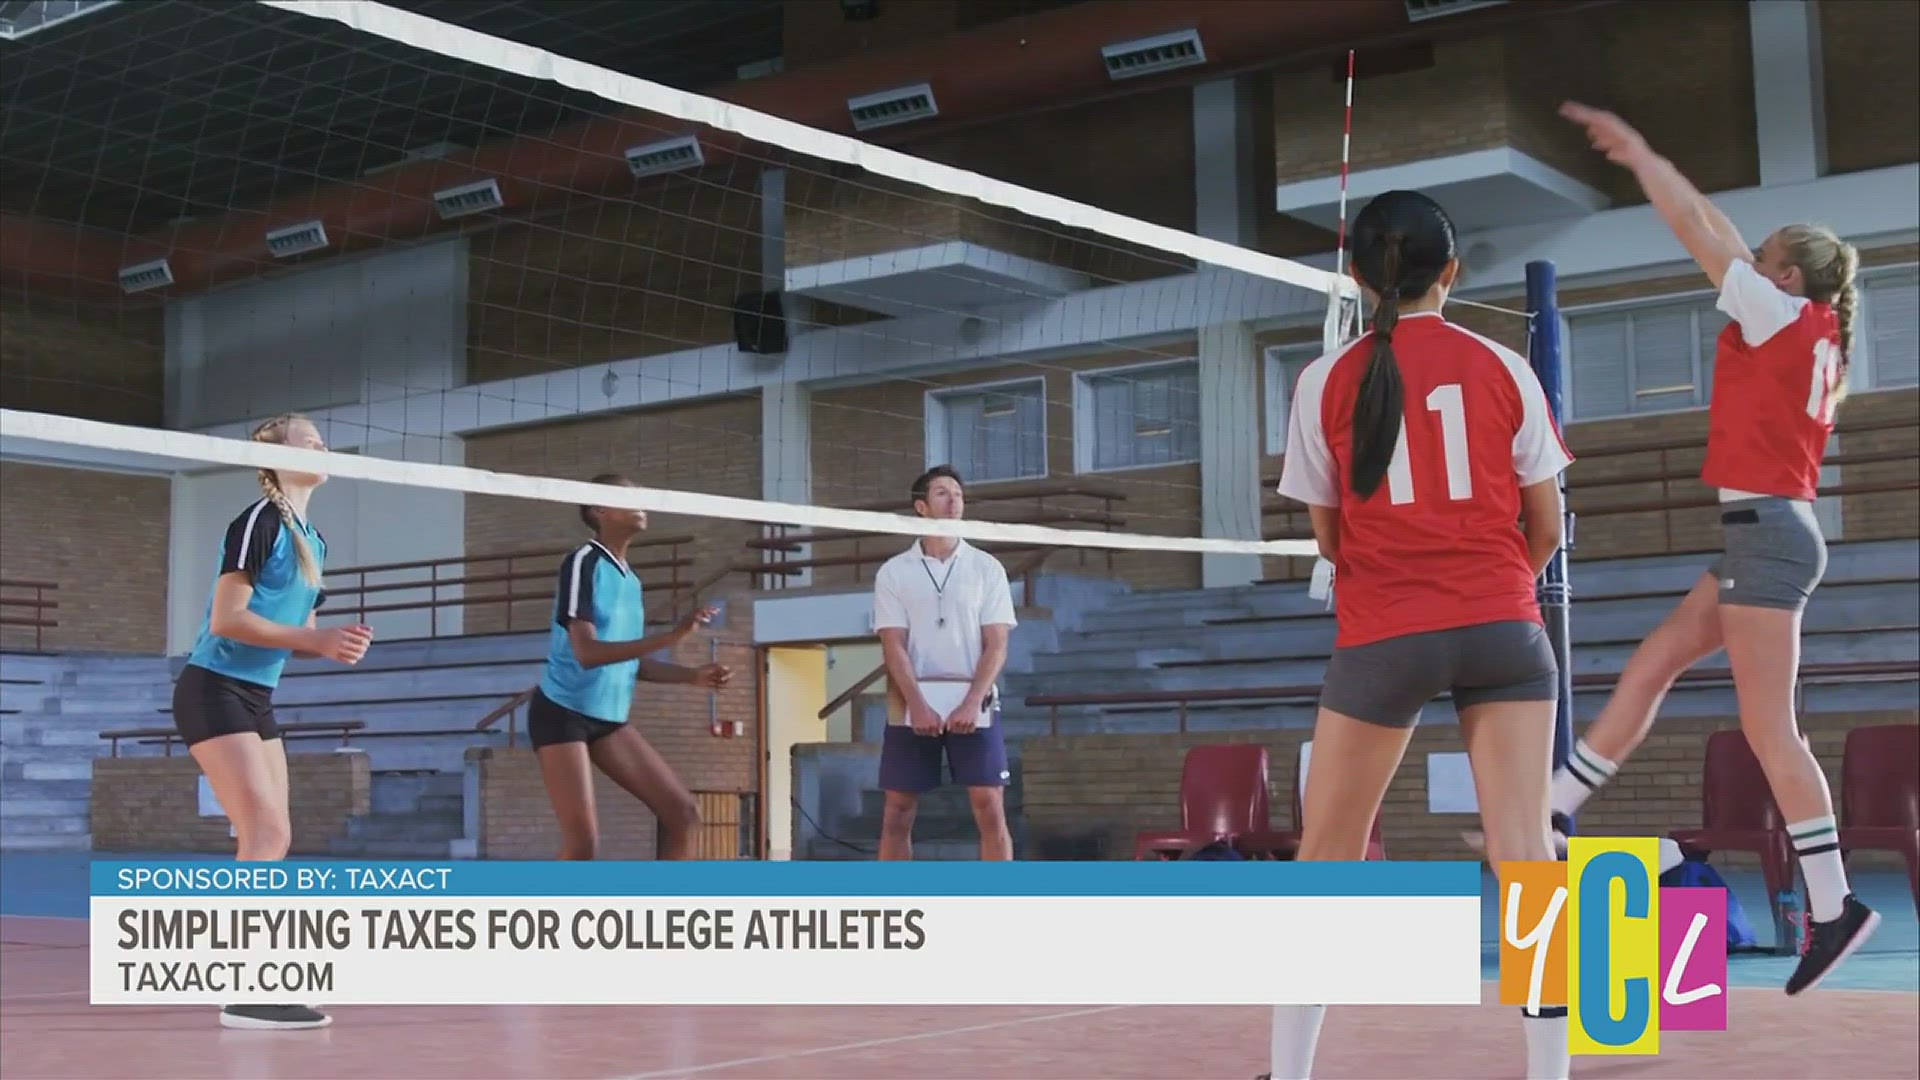 Get the facts on what you need to know when filing taxes as a college athlete. This segment paid for by TaxAct.